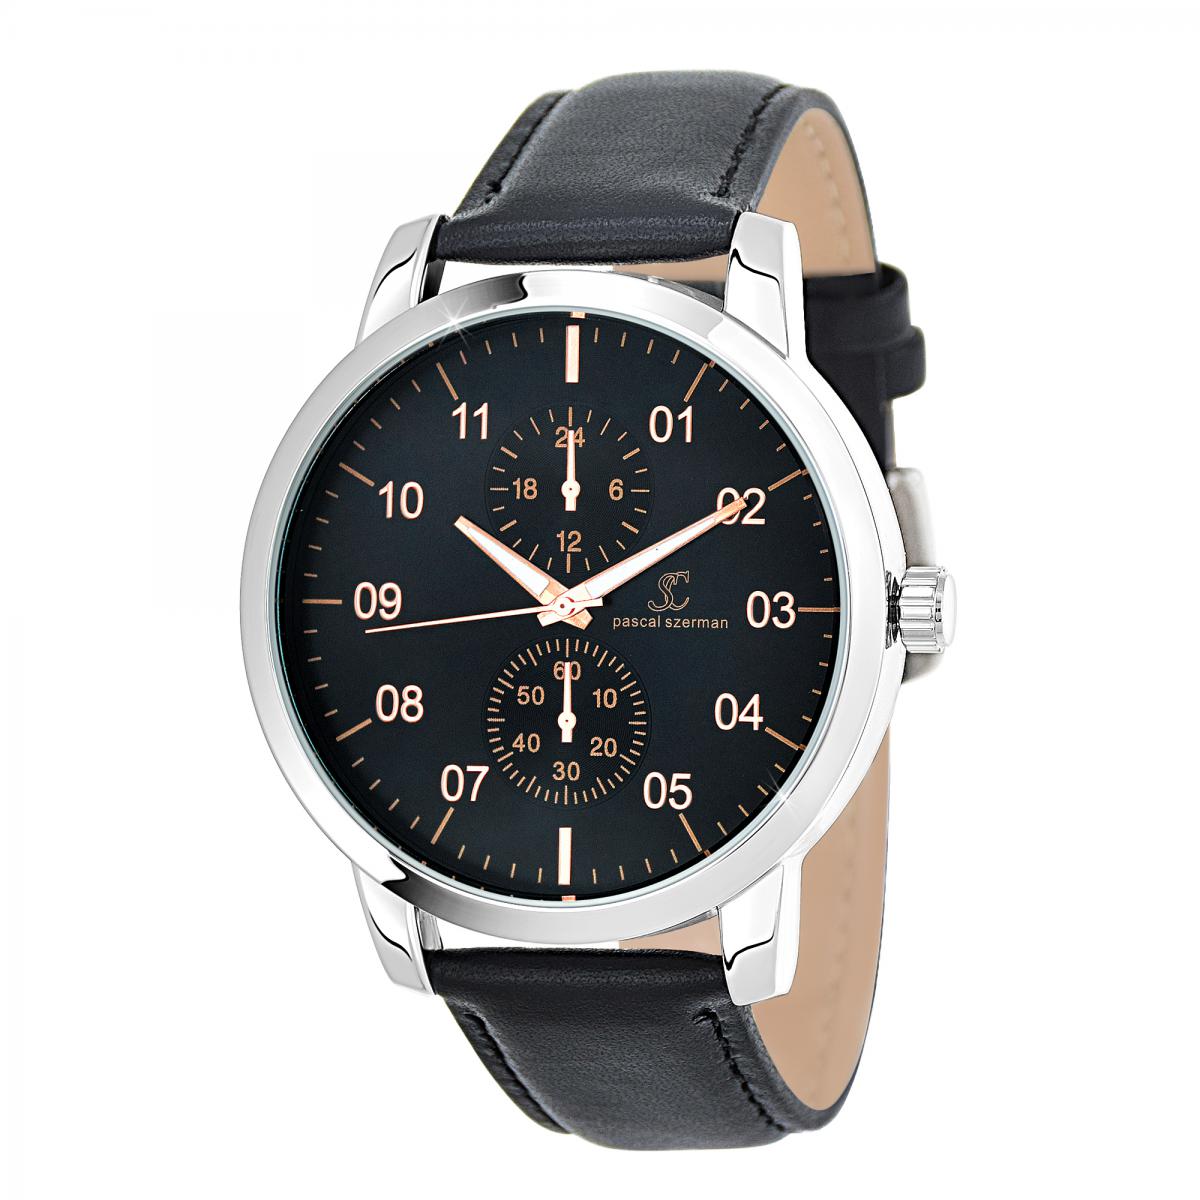 Promo : Montre Homme So Charm MH291-NFN